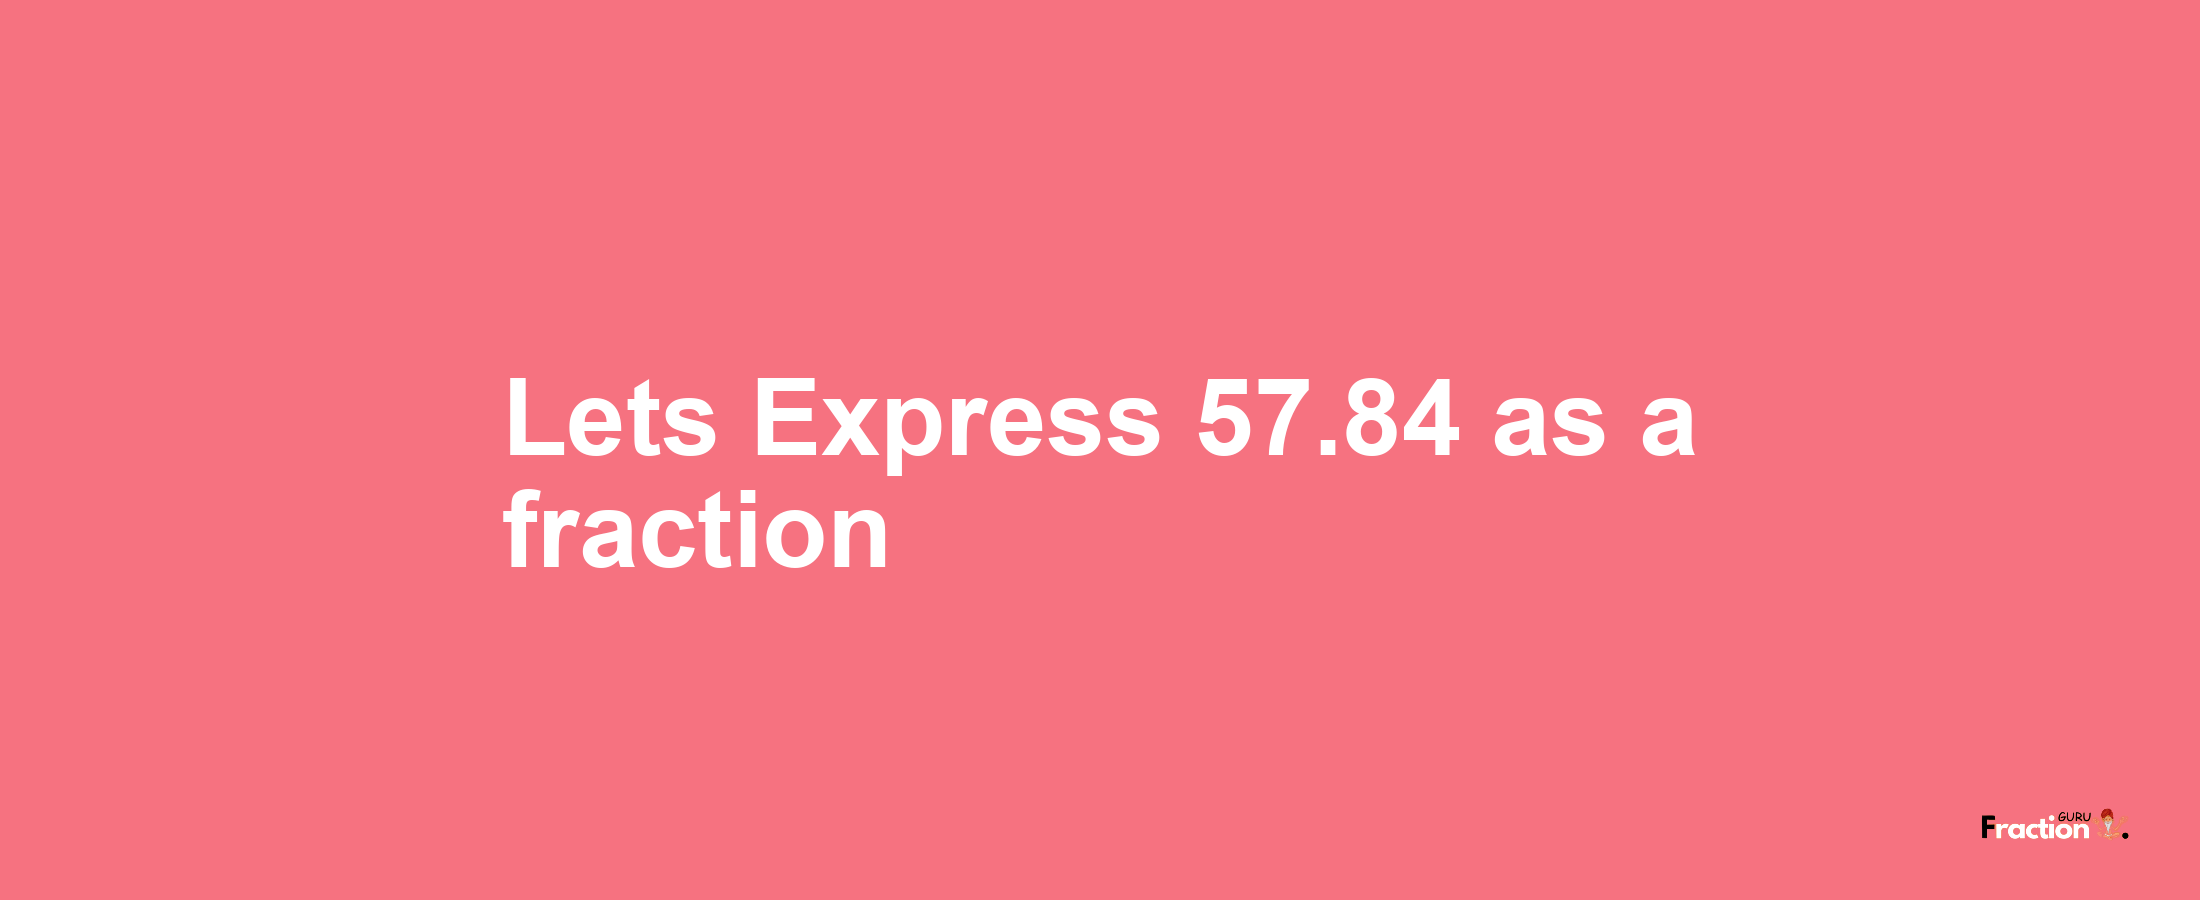 Lets Express 57.84 as afraction